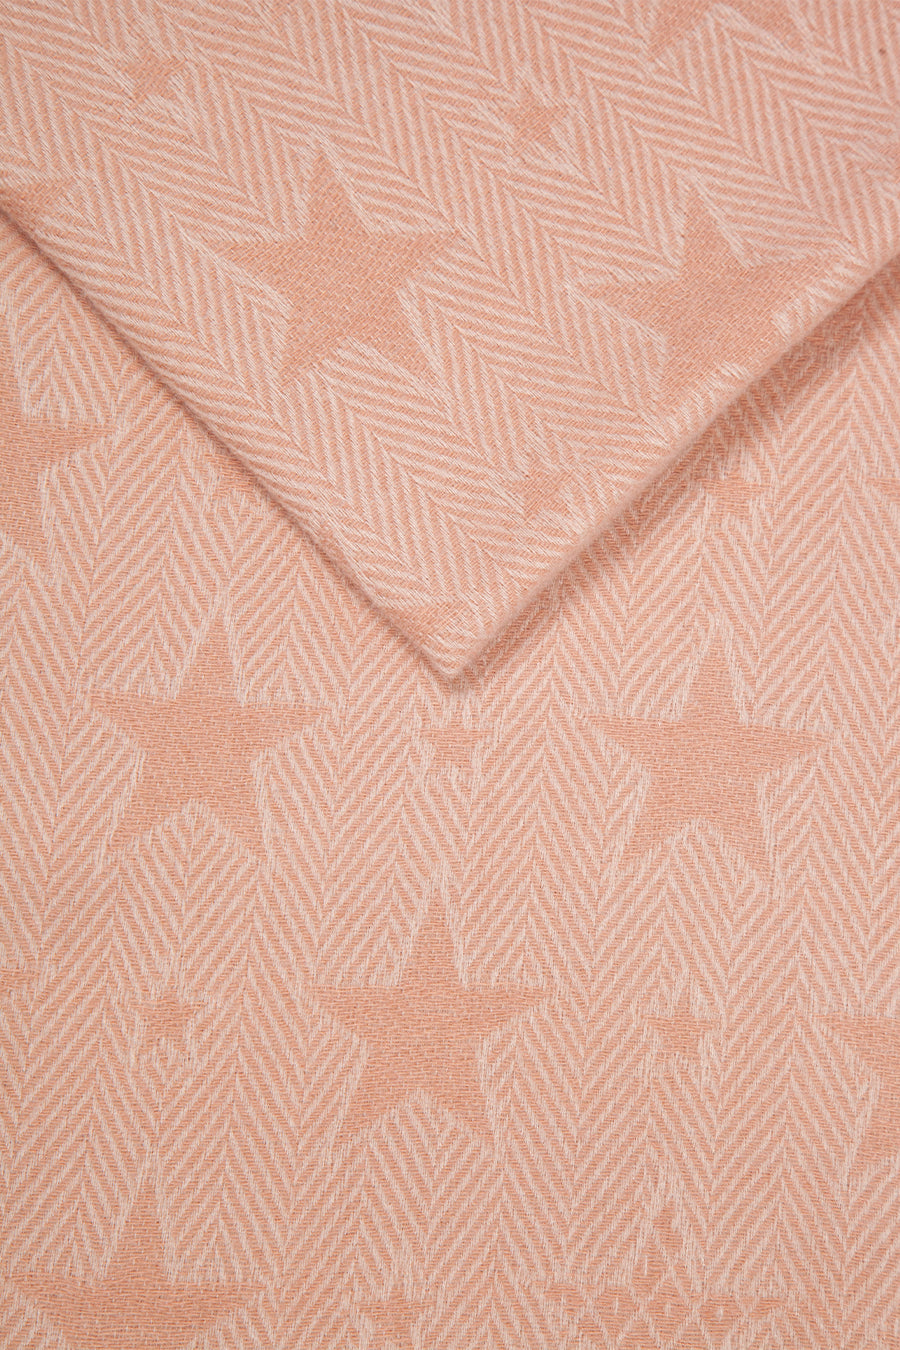 Light Pink Repeat Star Detail Blanket Scarf